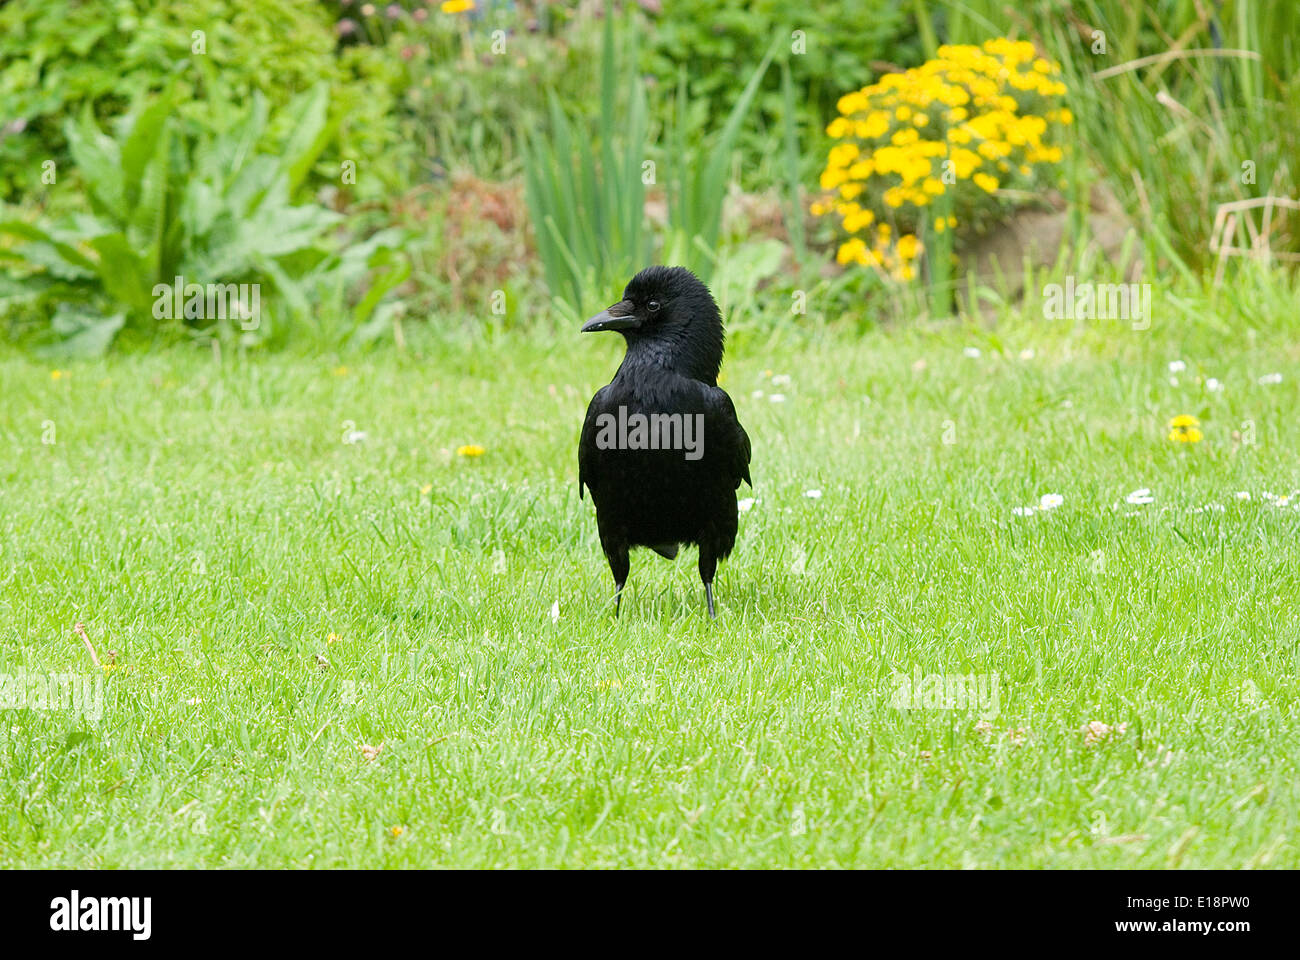 Carrion crow in an aggressive pose. Shortly after taking this photo a fight broke out between this bird and another. Stock Photo